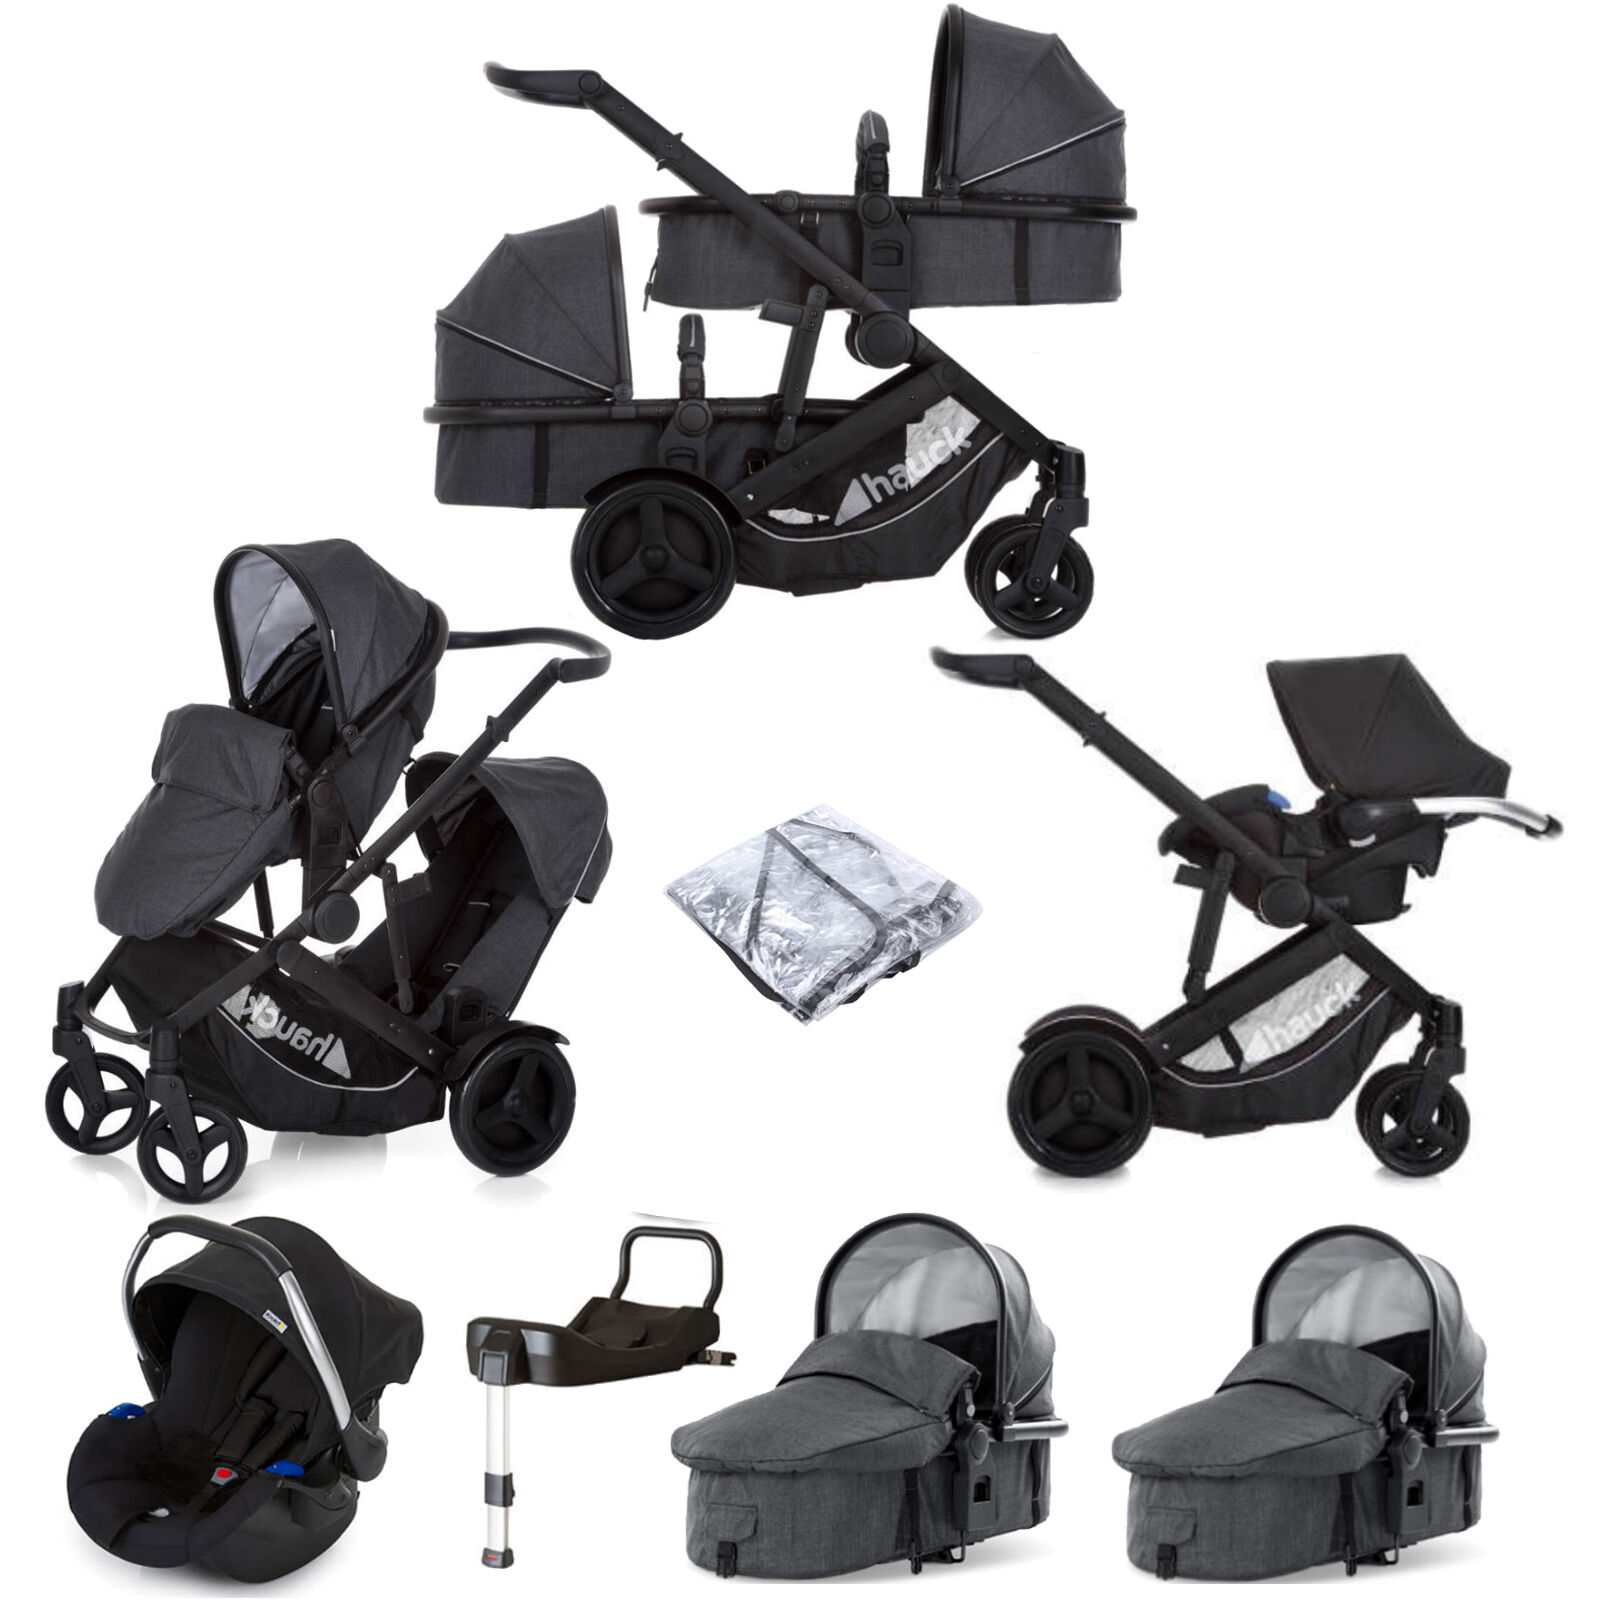 Hauck Duett 3 Tandem (Comfort Fix) Travel System With 2 Carrycots + ISOFIX Base - Melange Charcoal